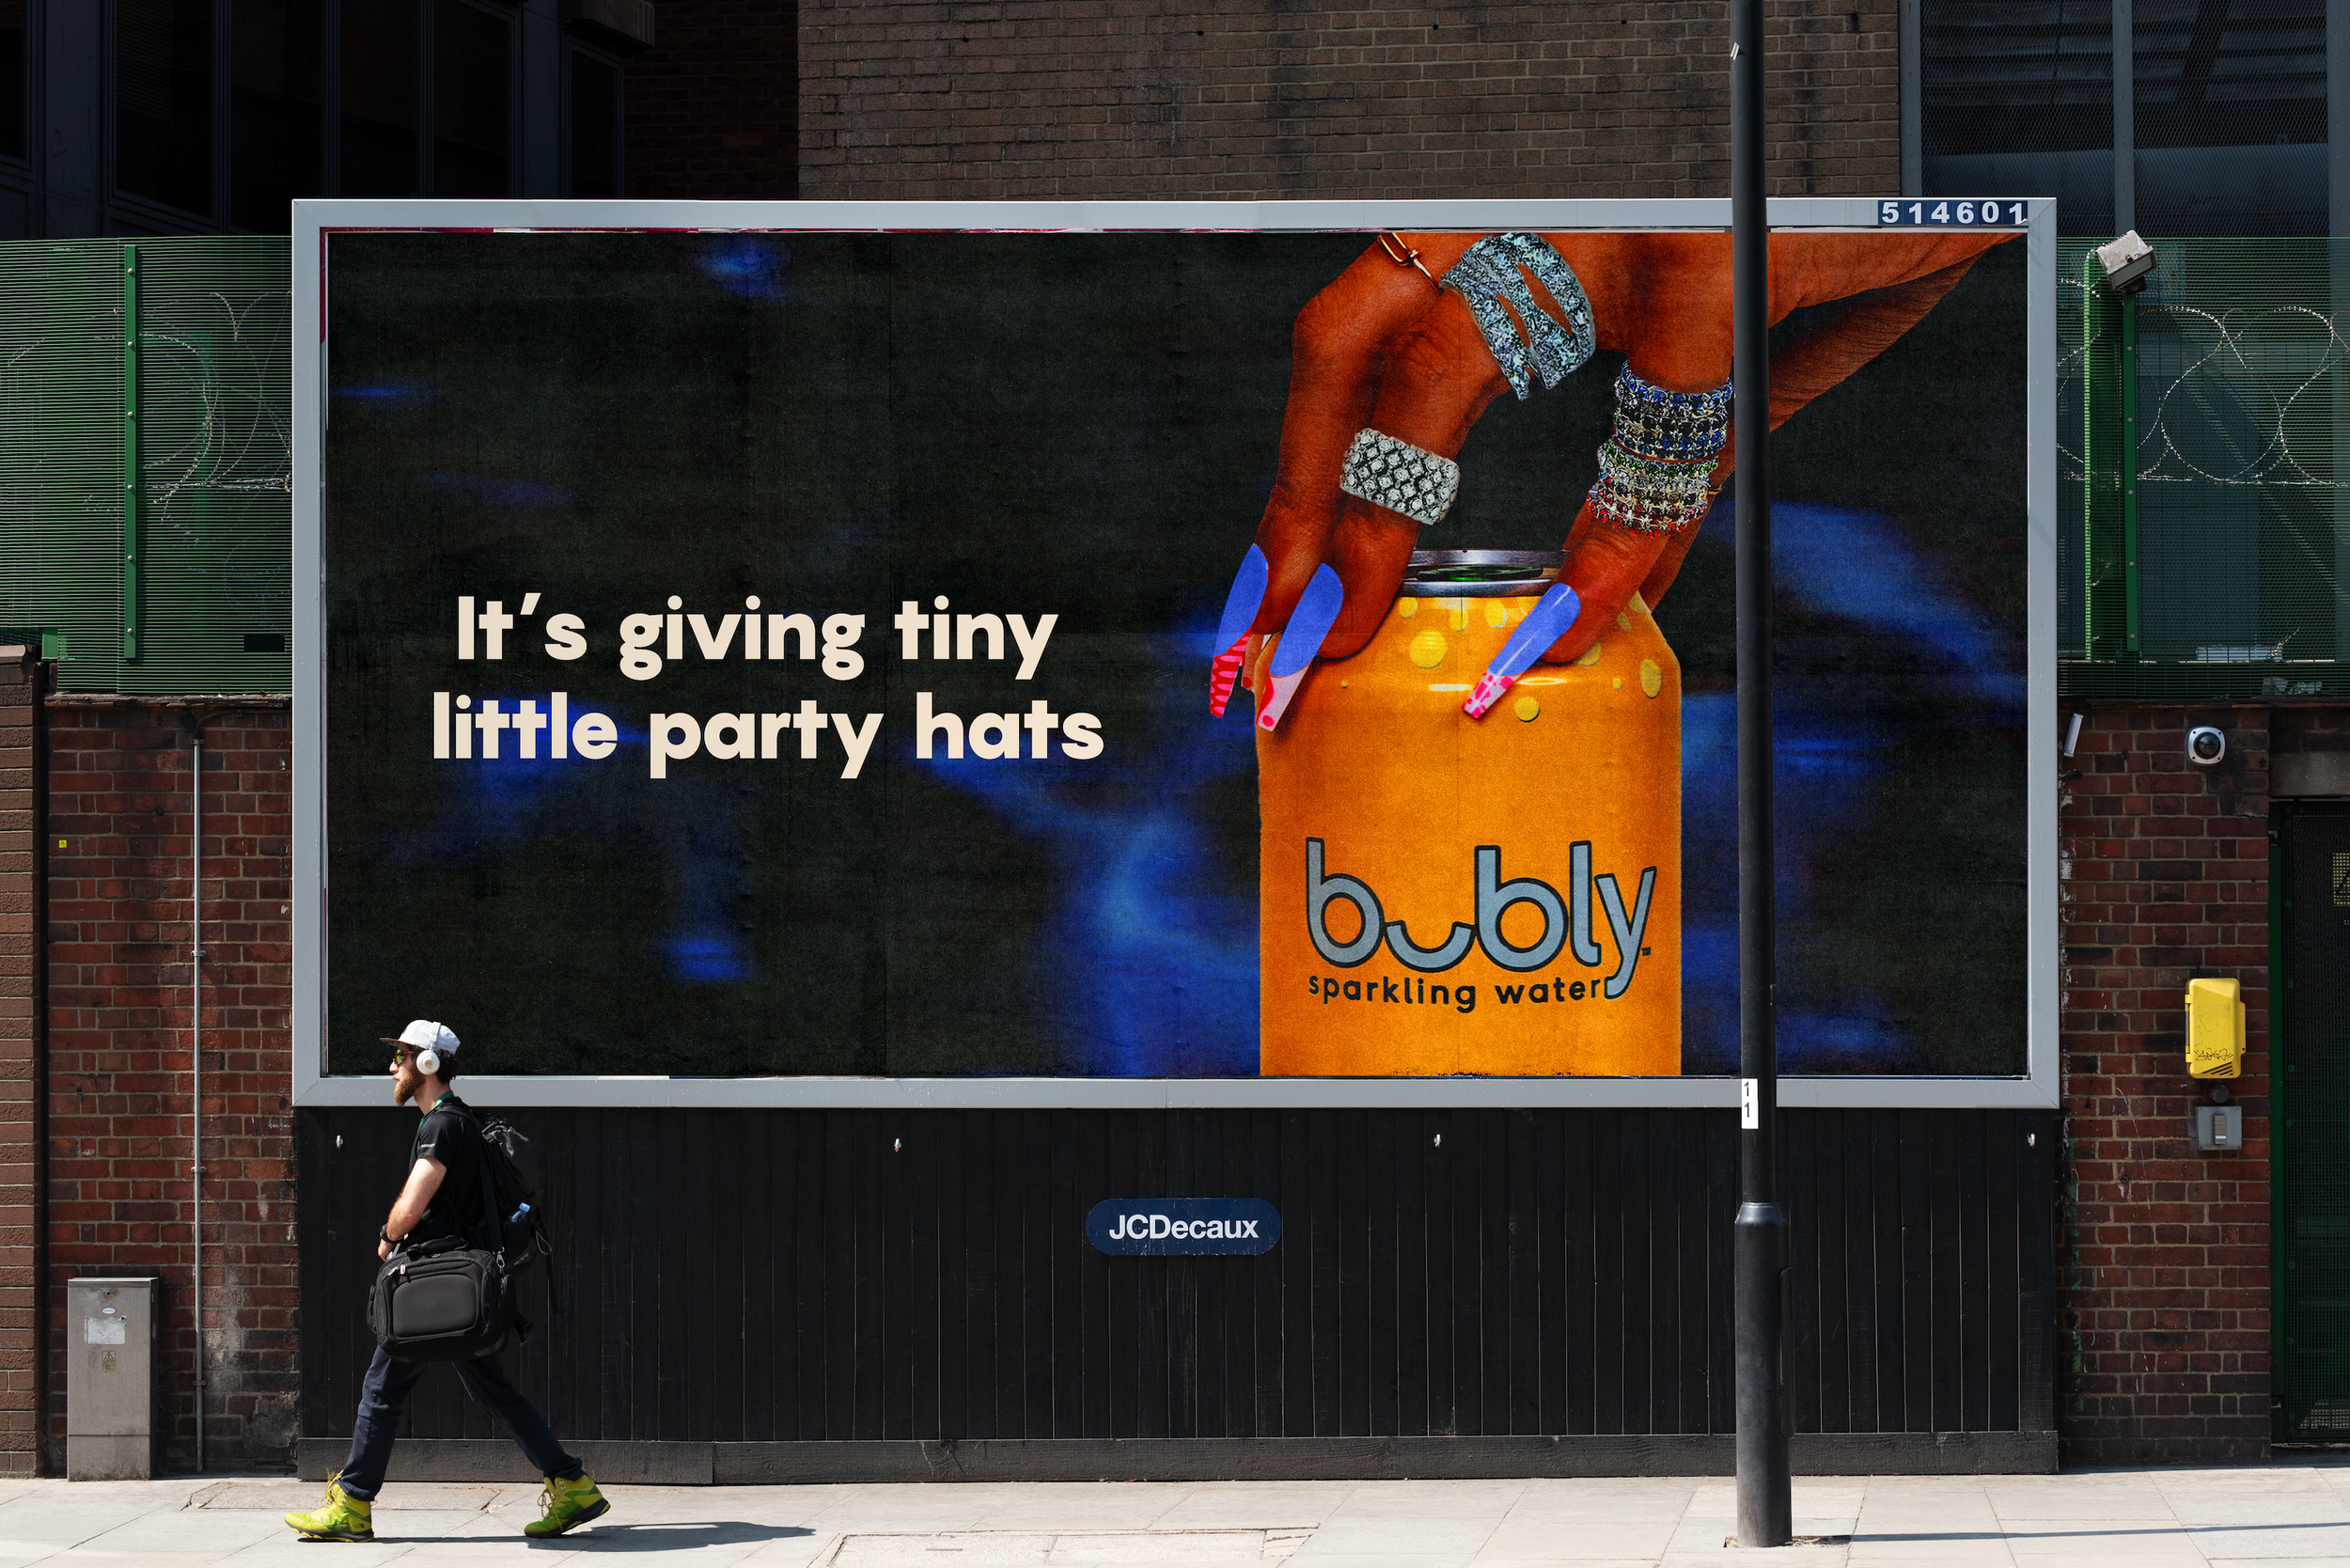 bubly_longbillboard_casey_revised.png